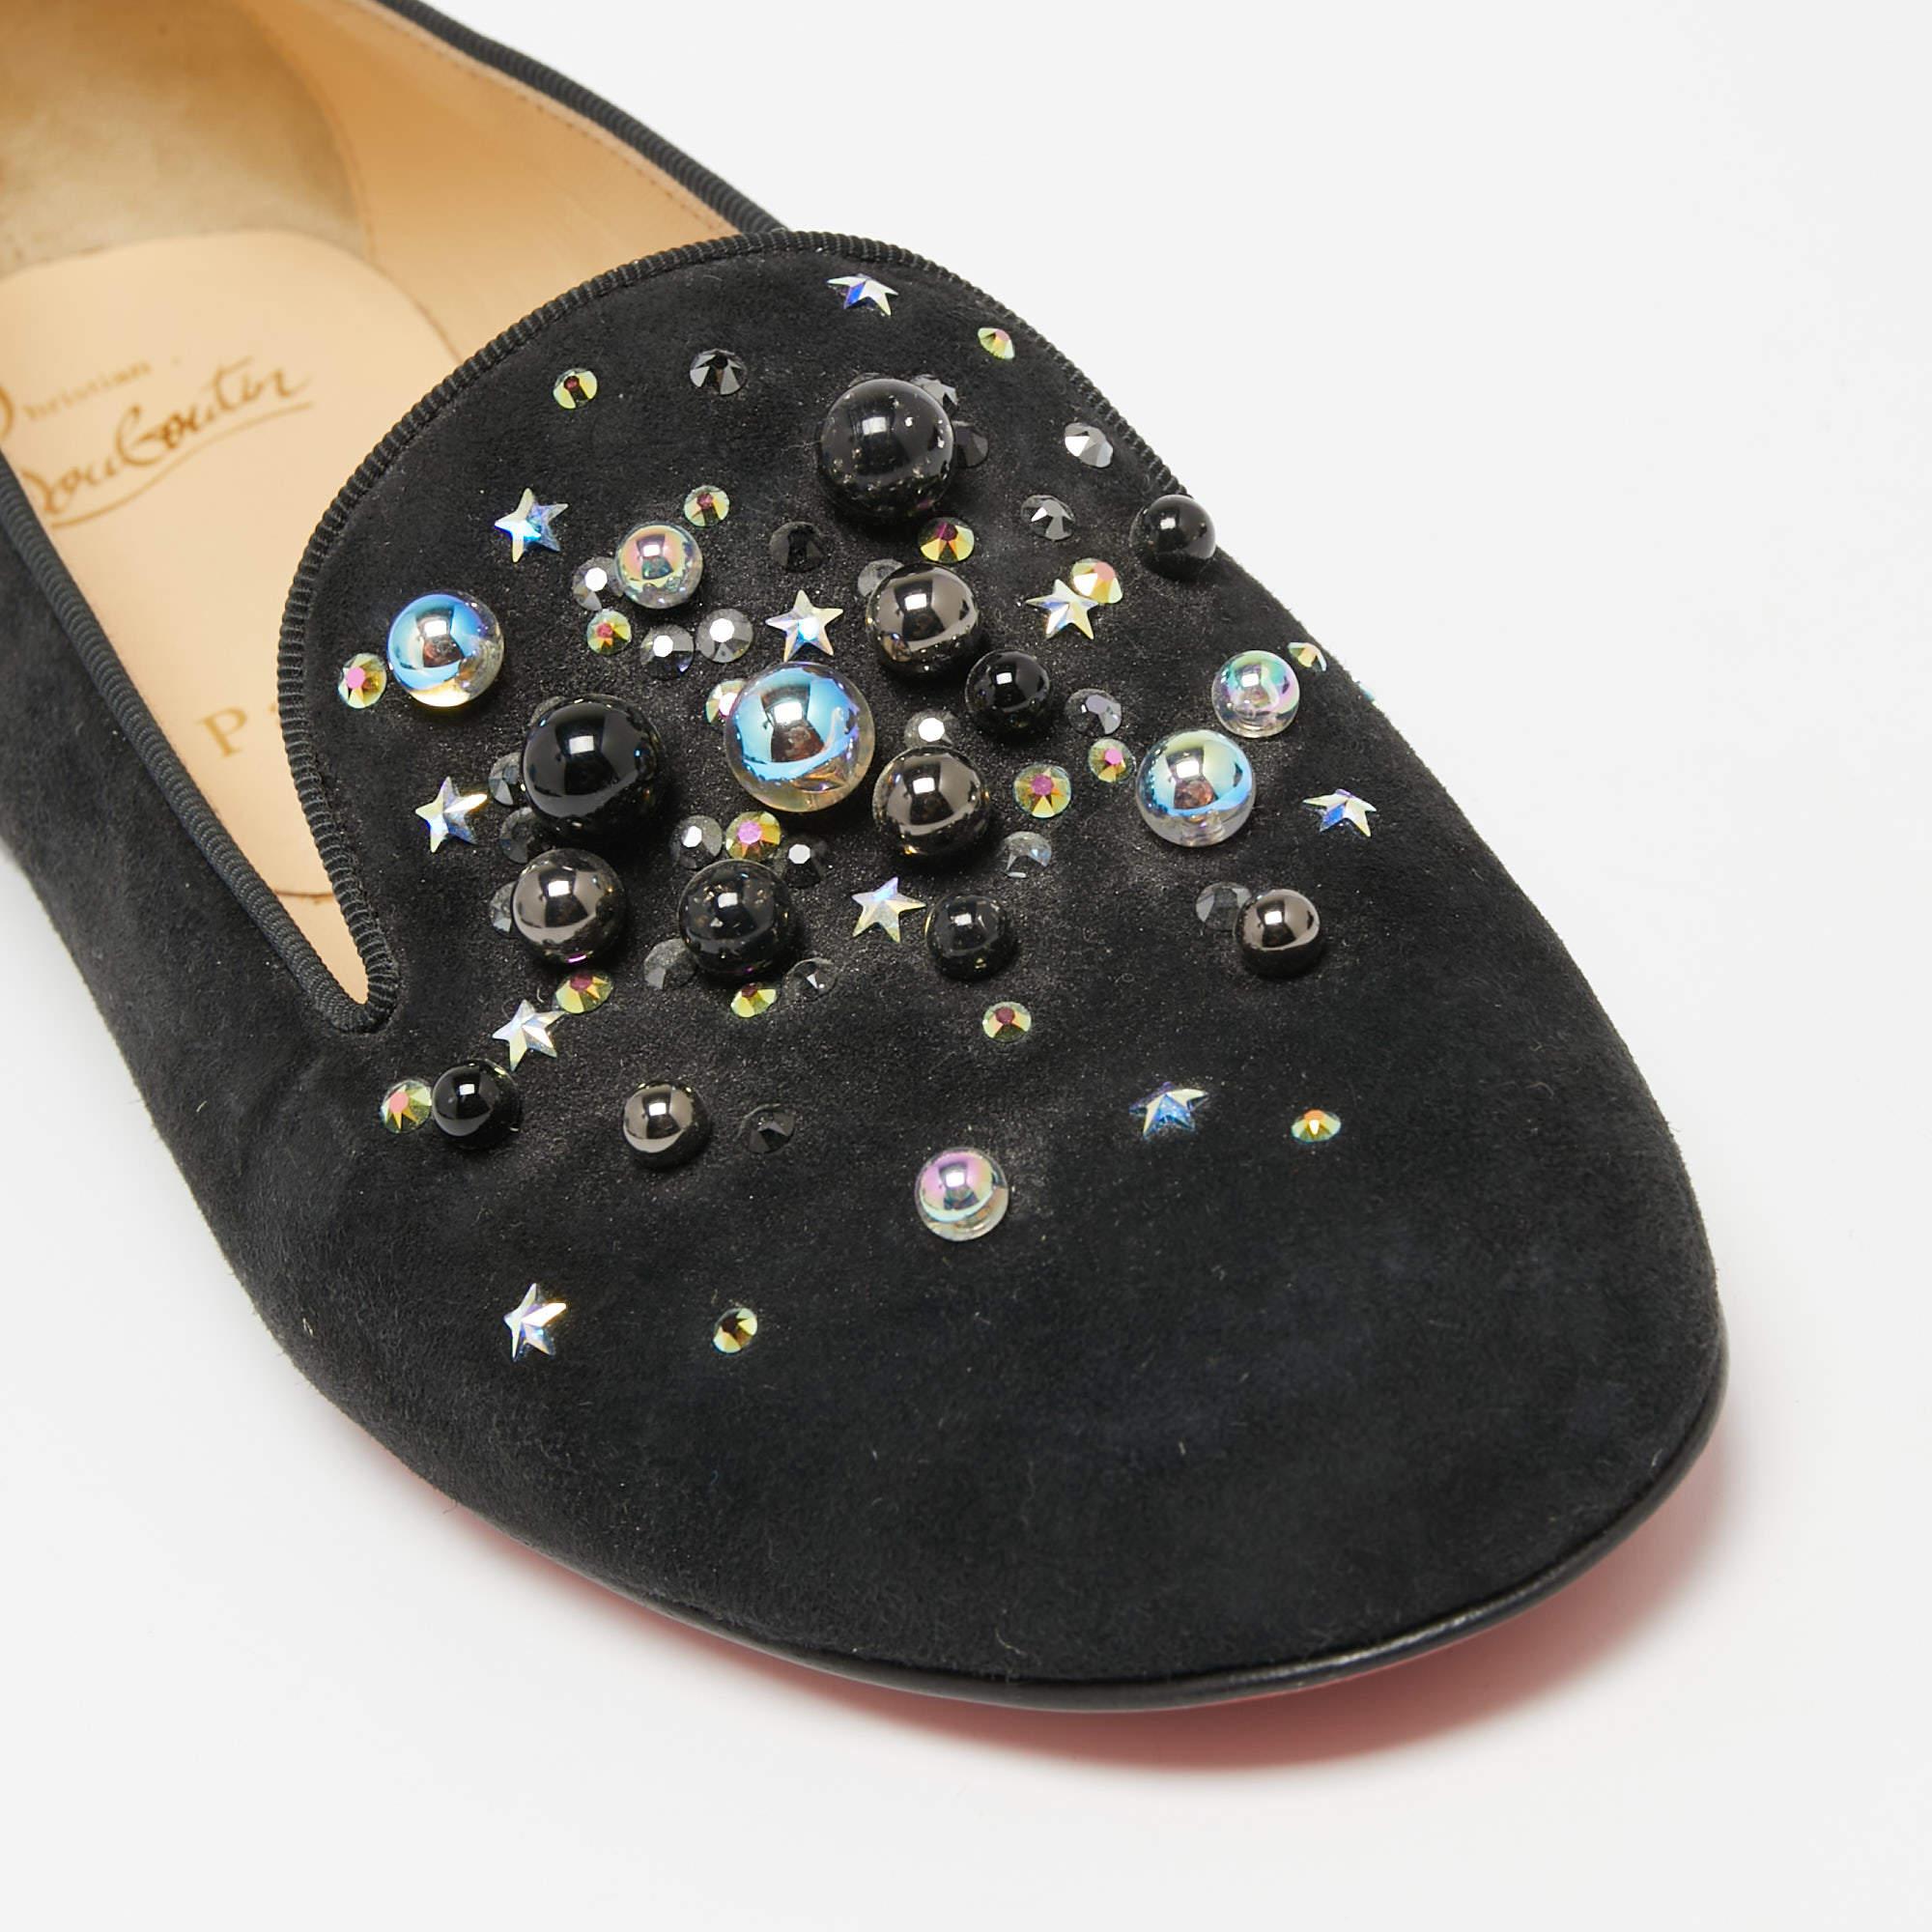 Christian Louboutin Black Suede Candy Studded Smoking Slippers Size 36 3